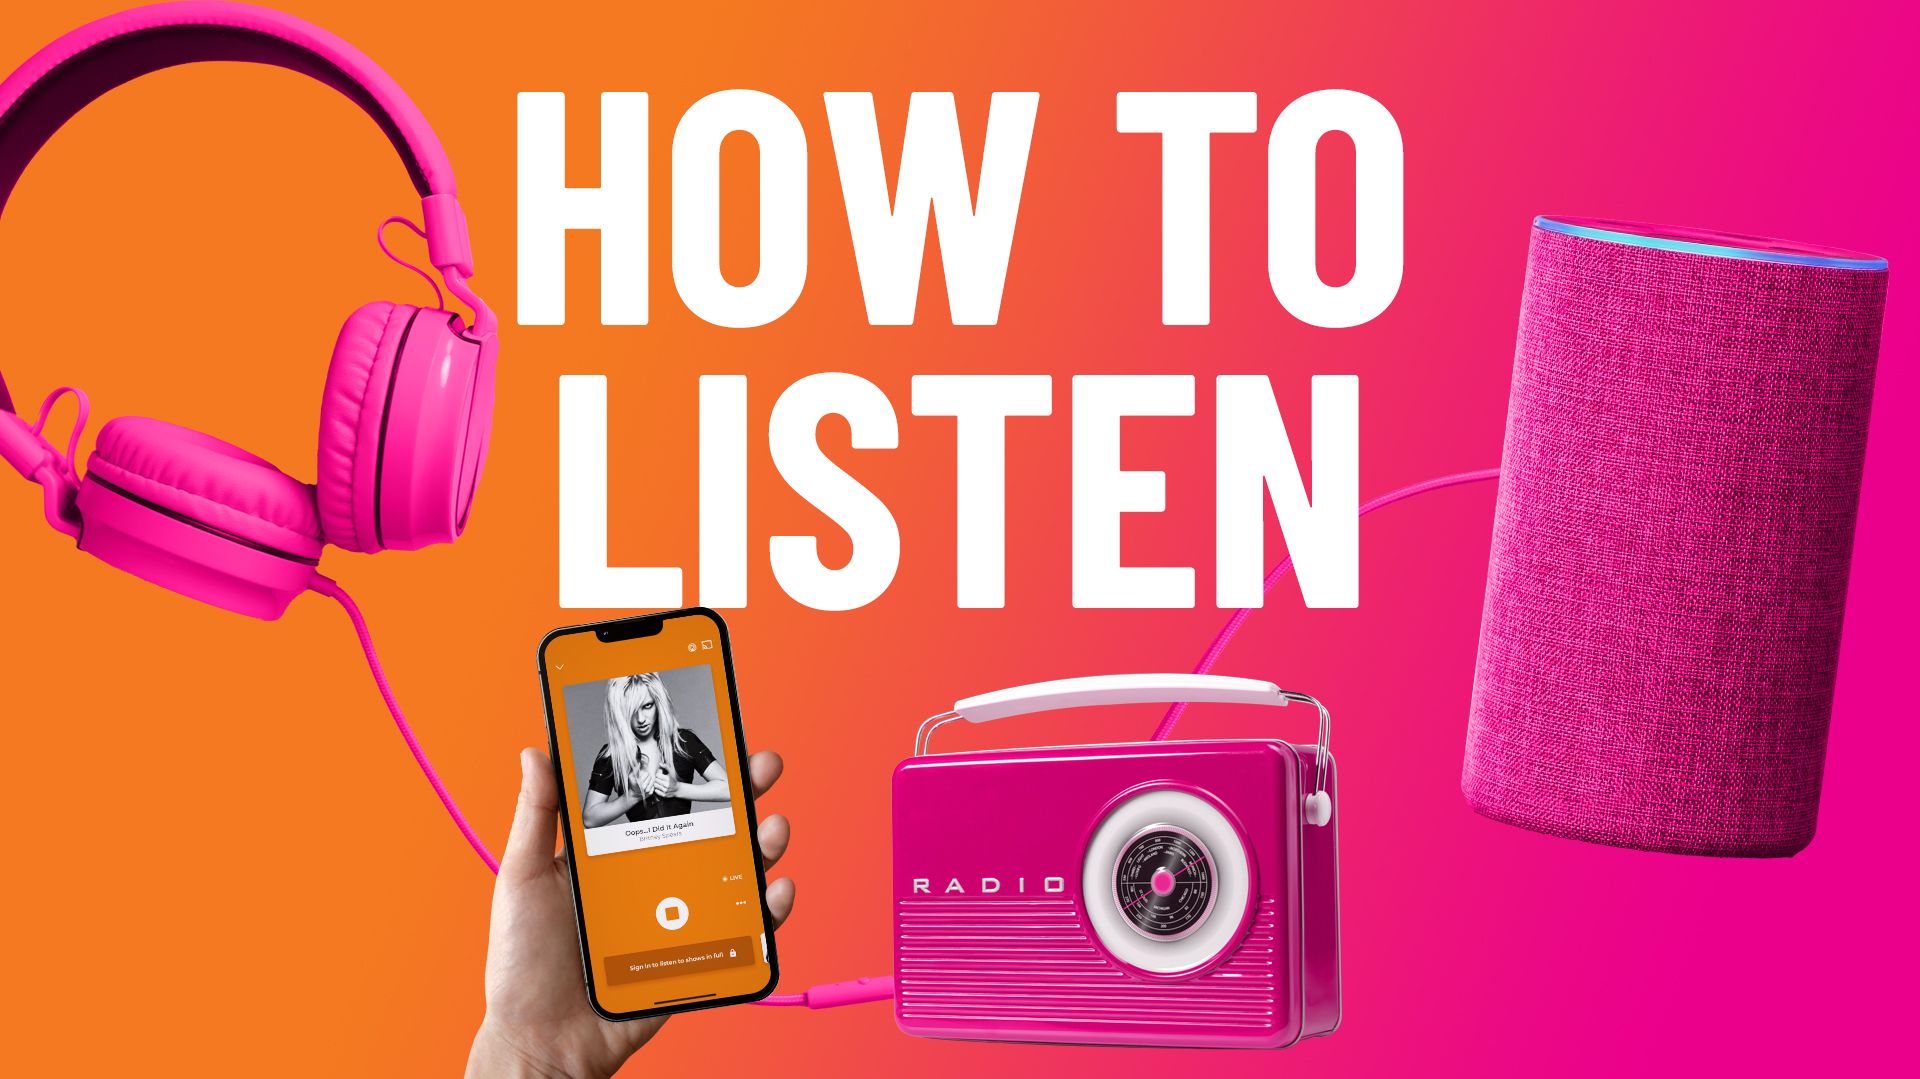 How can listen to Radio City?